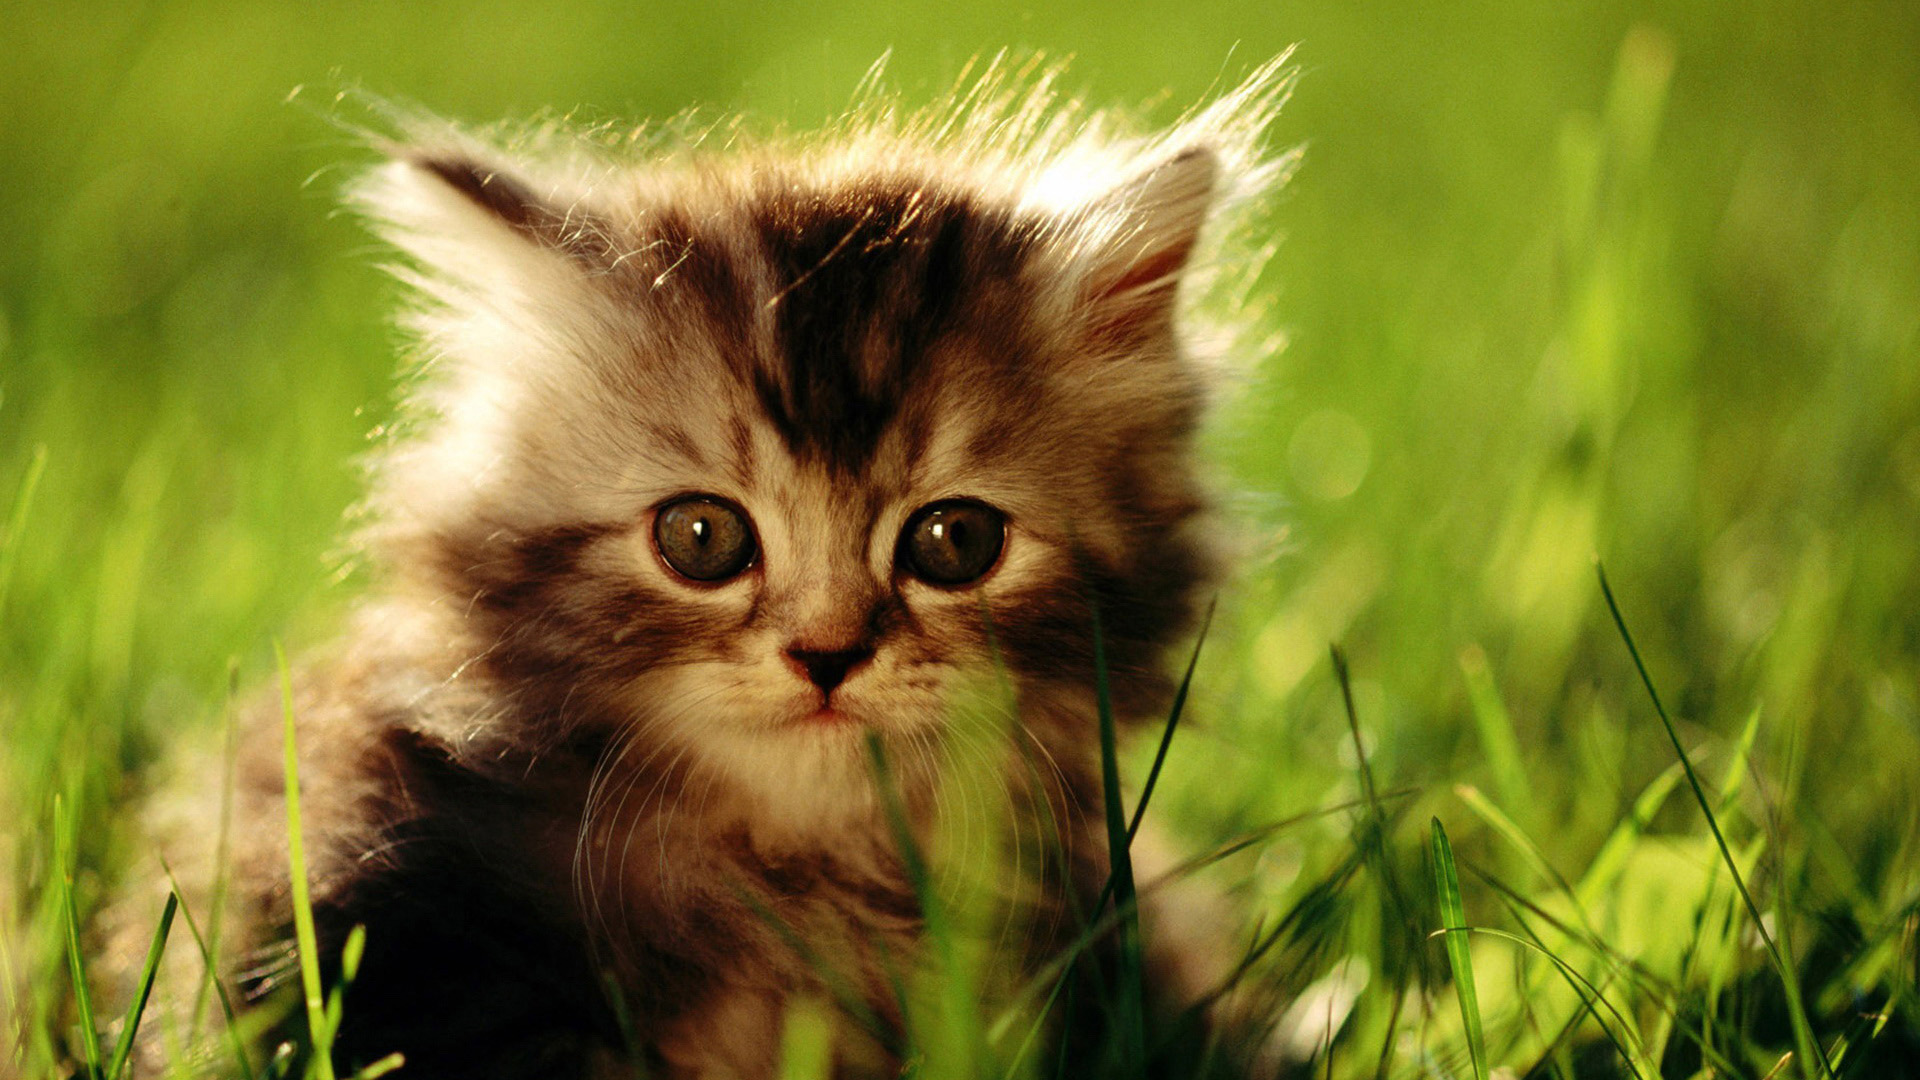 Cat Wallpaper Other